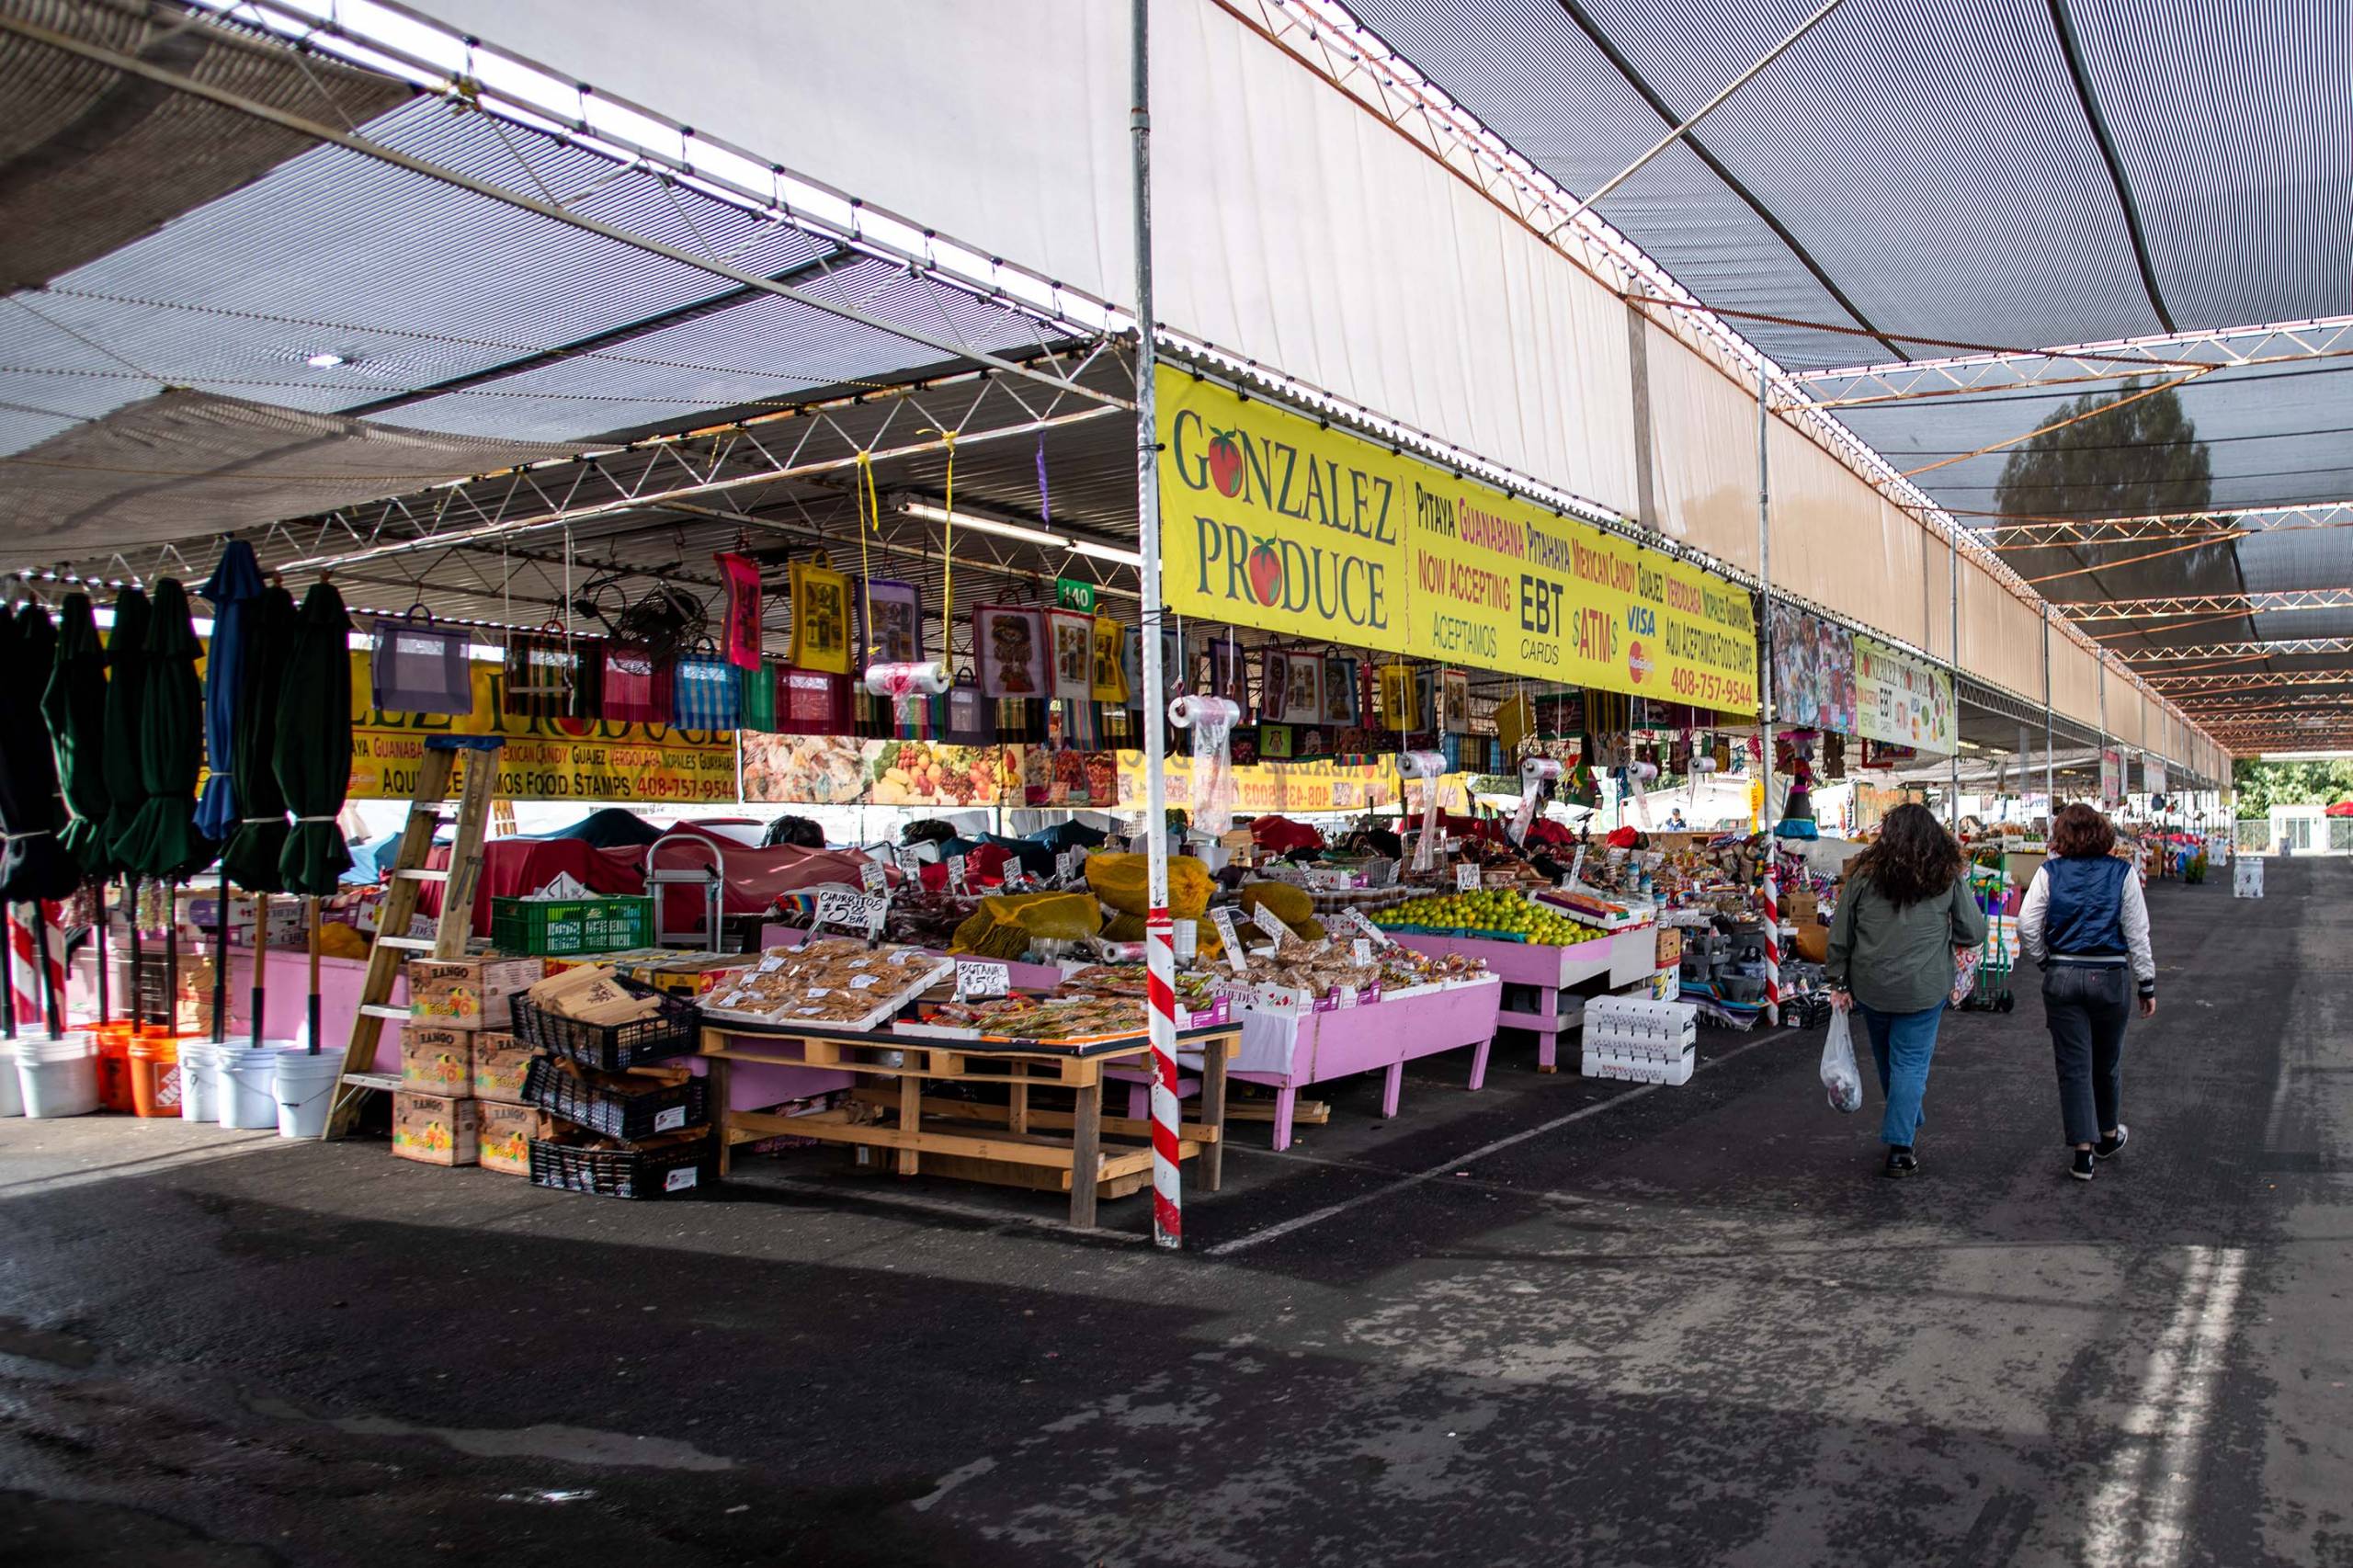 A row of open-air produce stands.